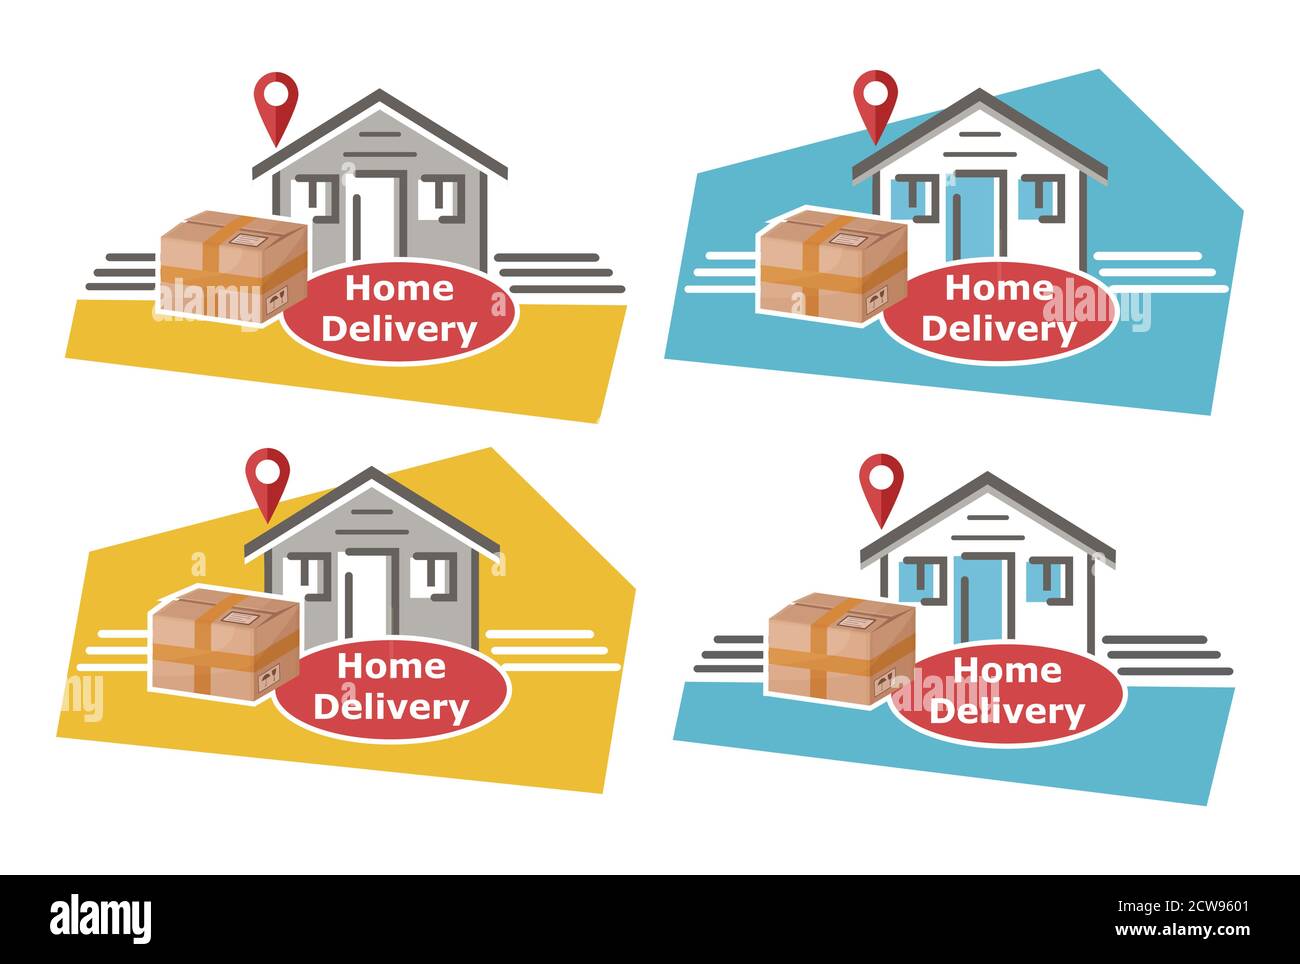 Home express delivery to door service icon set. Cardboard package on house doorstep. Online shopping. Fast courier shipping of orders Stock Vector